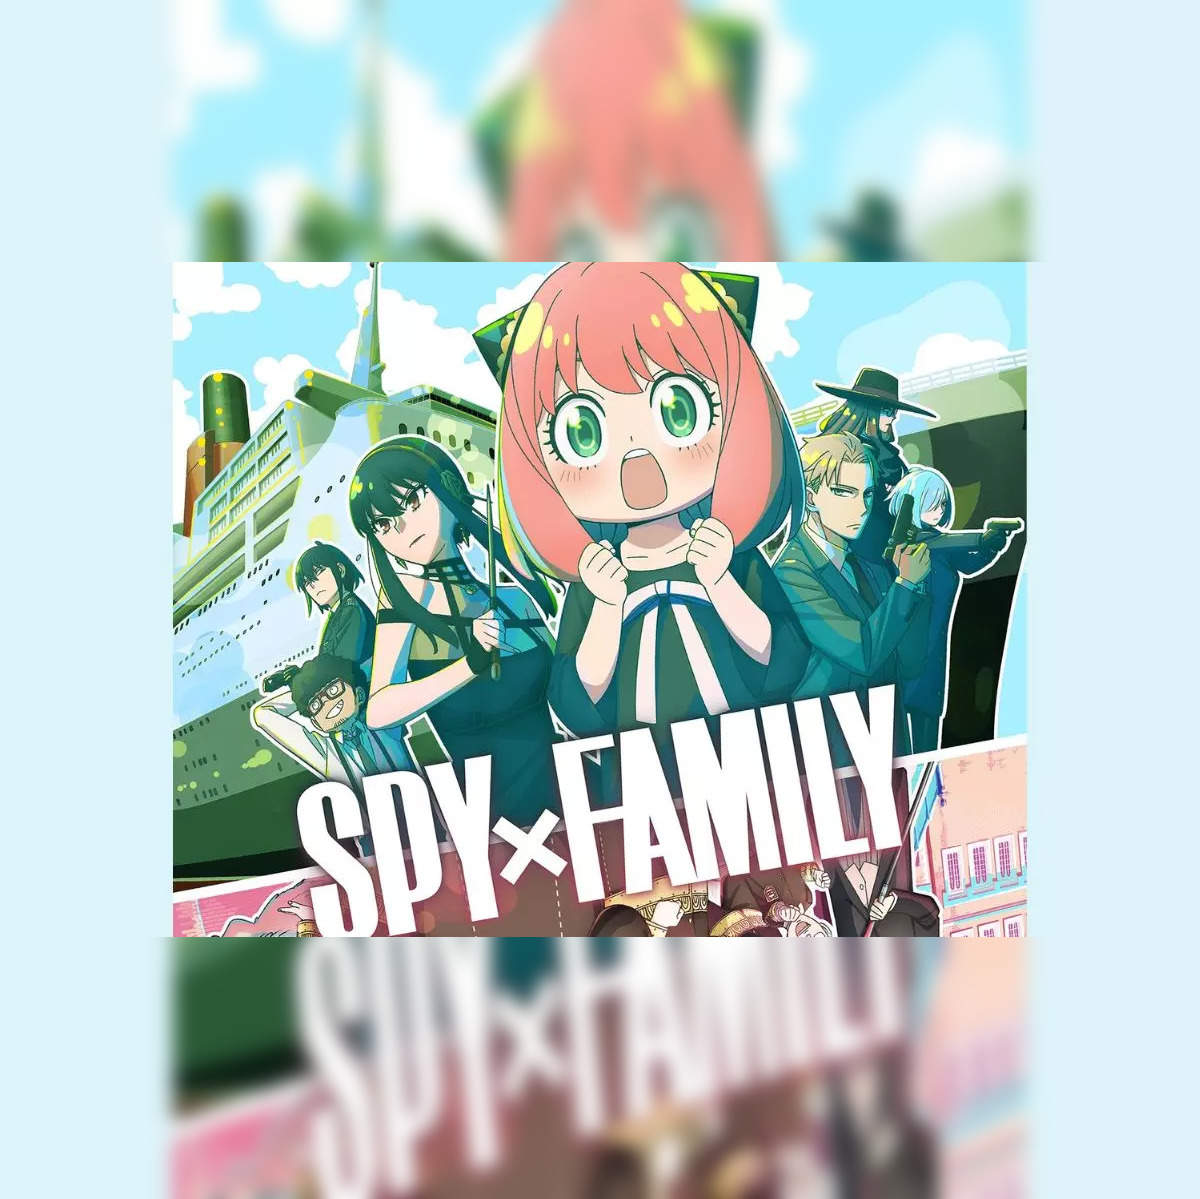 Spy x Family episode 19: Anya and Damian grow closer while anime-original  content sees Loid and Yor connect